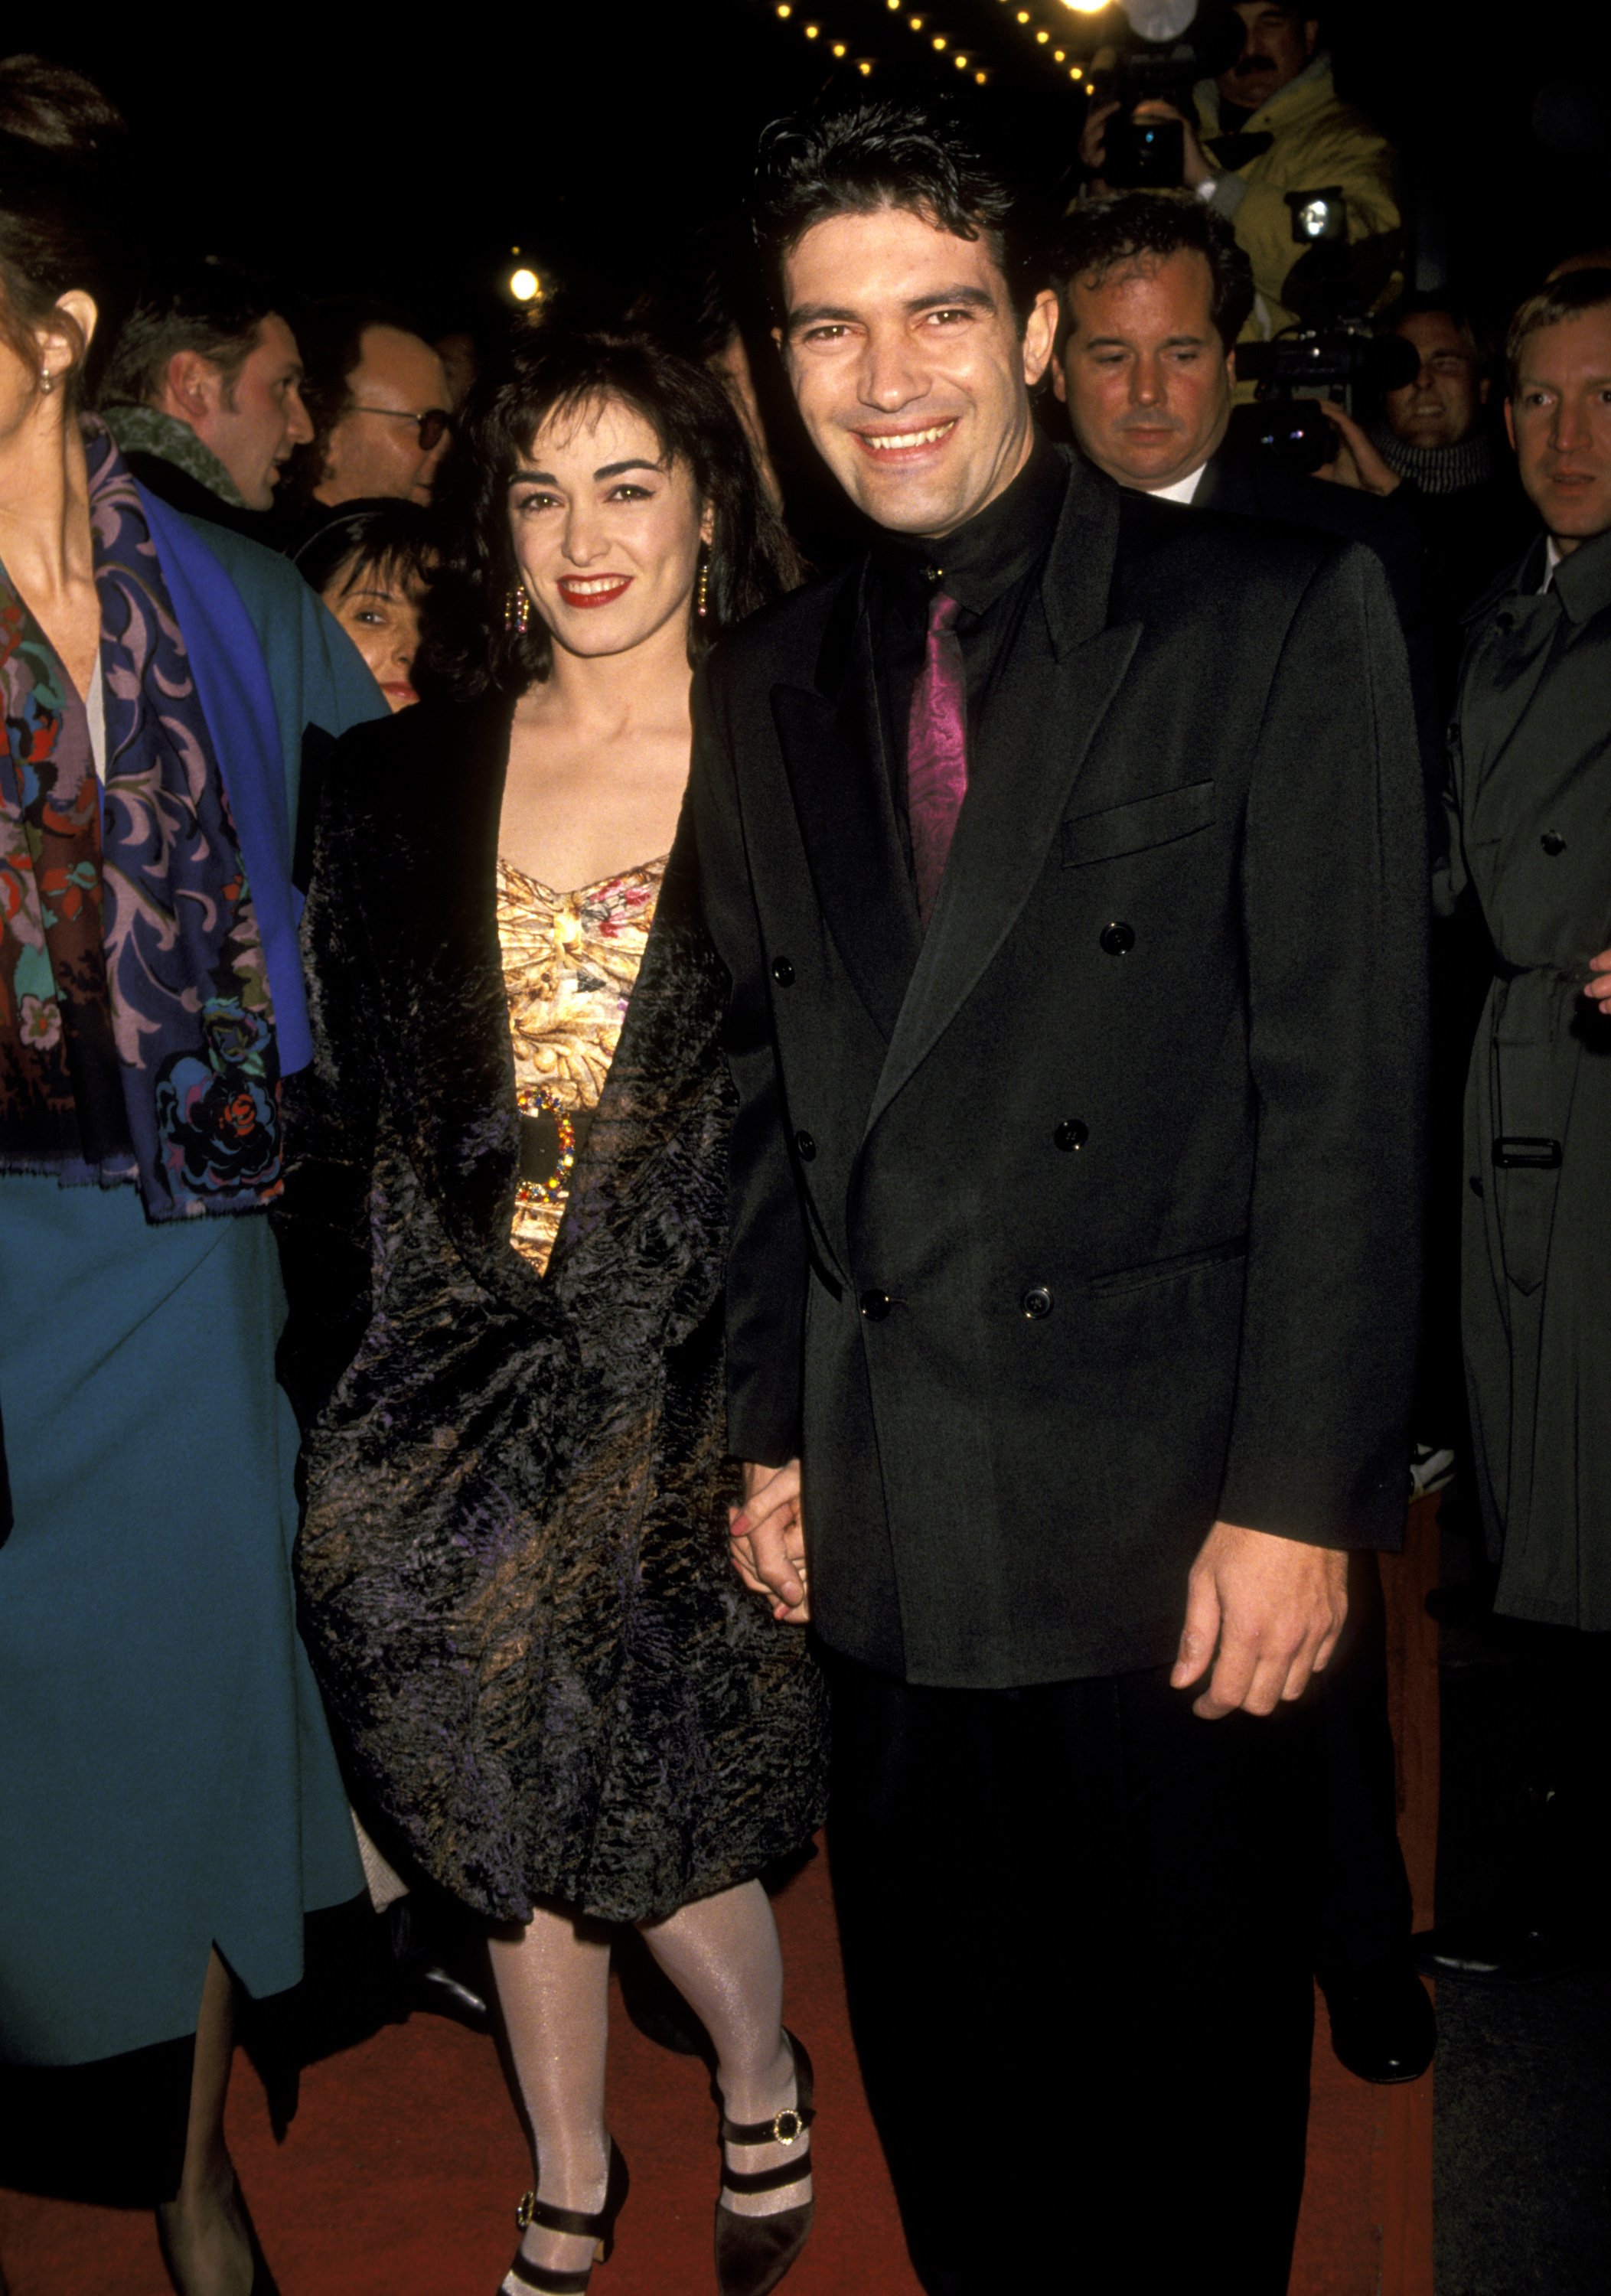 Antonio Banderas and Ana Leza are photographed during "The Mambo Kings" New York Premiere on February 12, 1992, at Ziegfield Theatre in New York City | Source: Getty Images